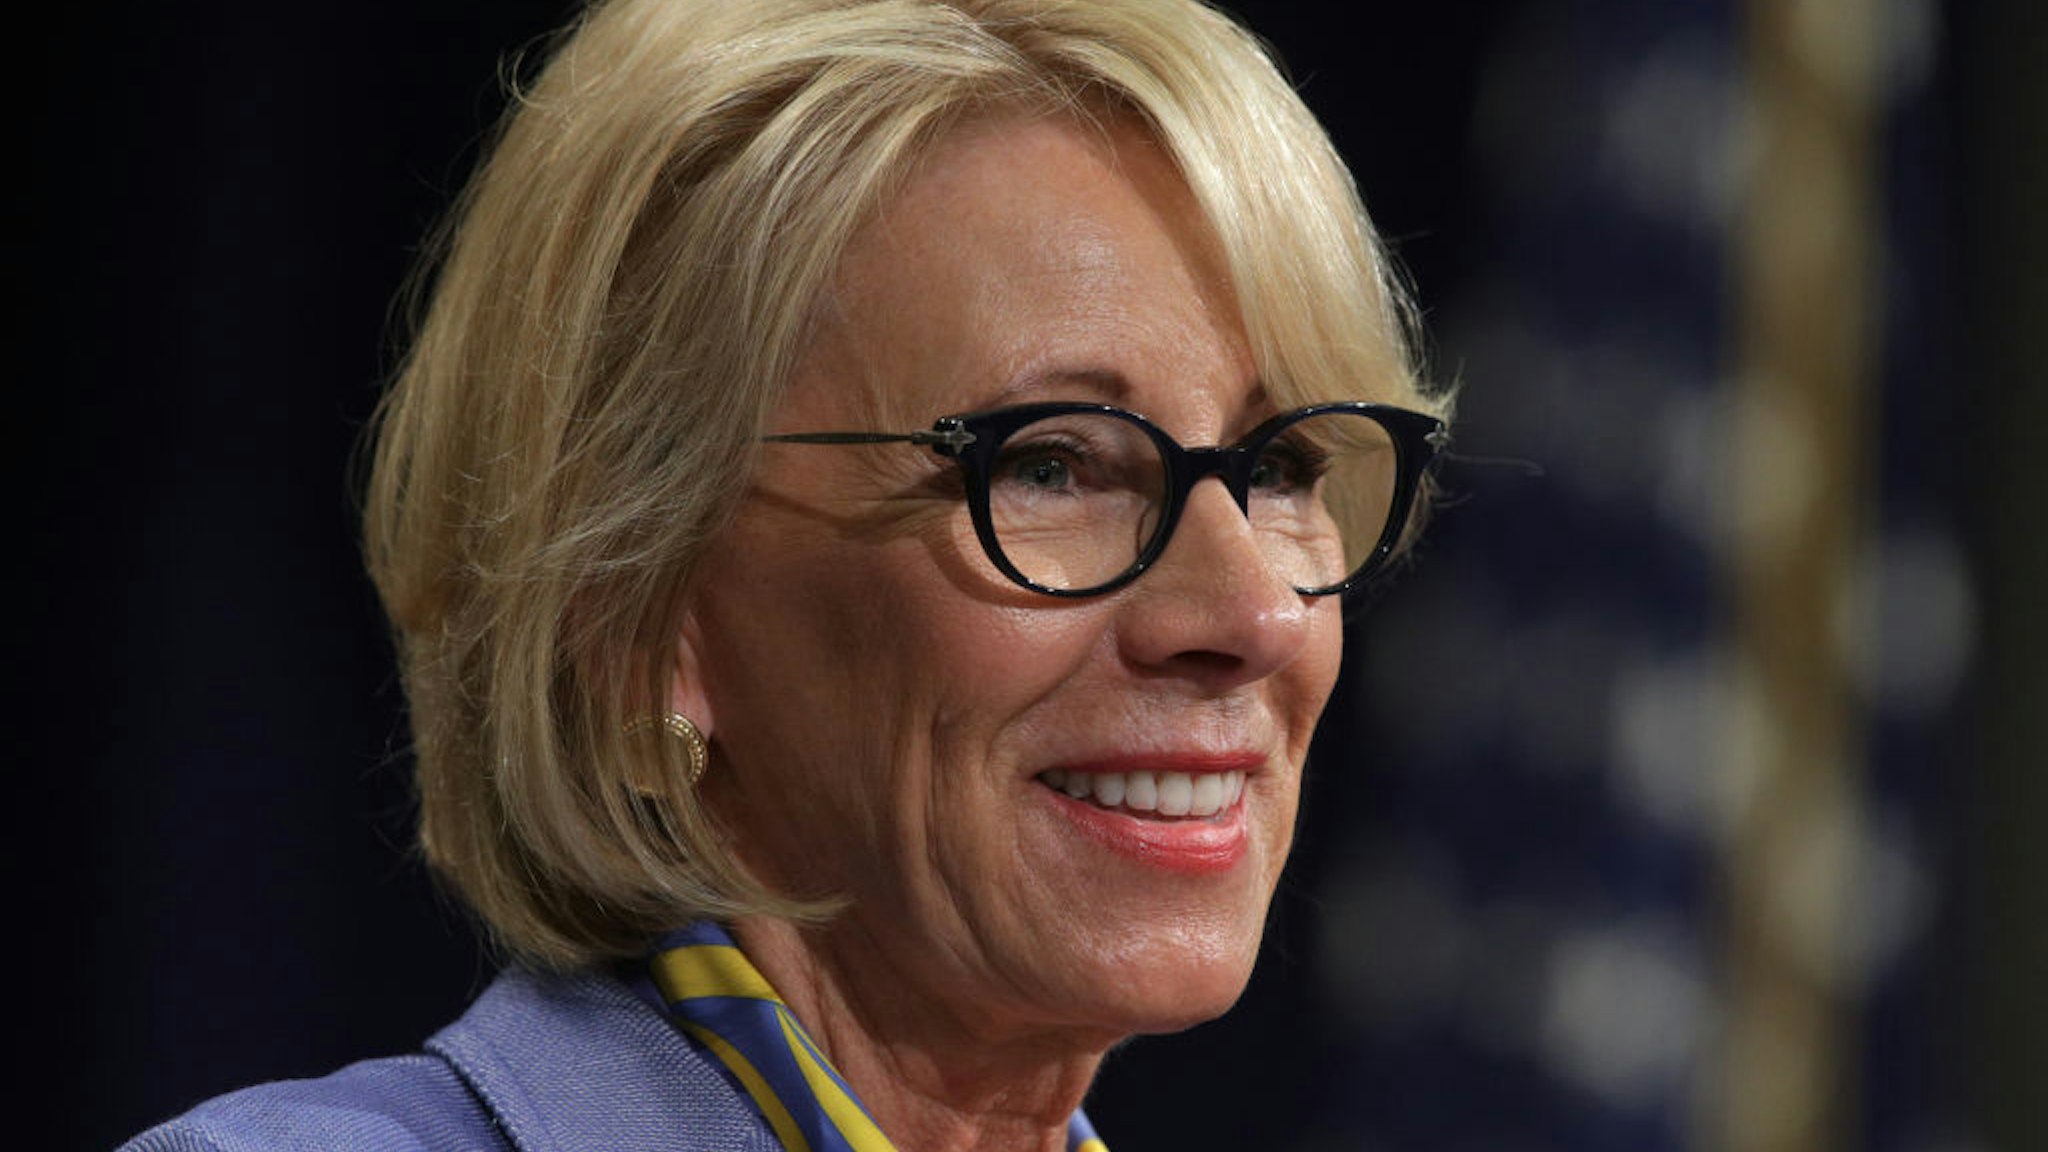 WASHINGTON, DC - JULY 15: U.S. Secretary of Education Betsy DeVos speaks during a "Combating Anti-Semitism Summit" at the Justice Department July 15, 2019 in Washington, DC. Administration officials and Jewish leaders are participating in the summit to discuss ways to combat anti-semitism.